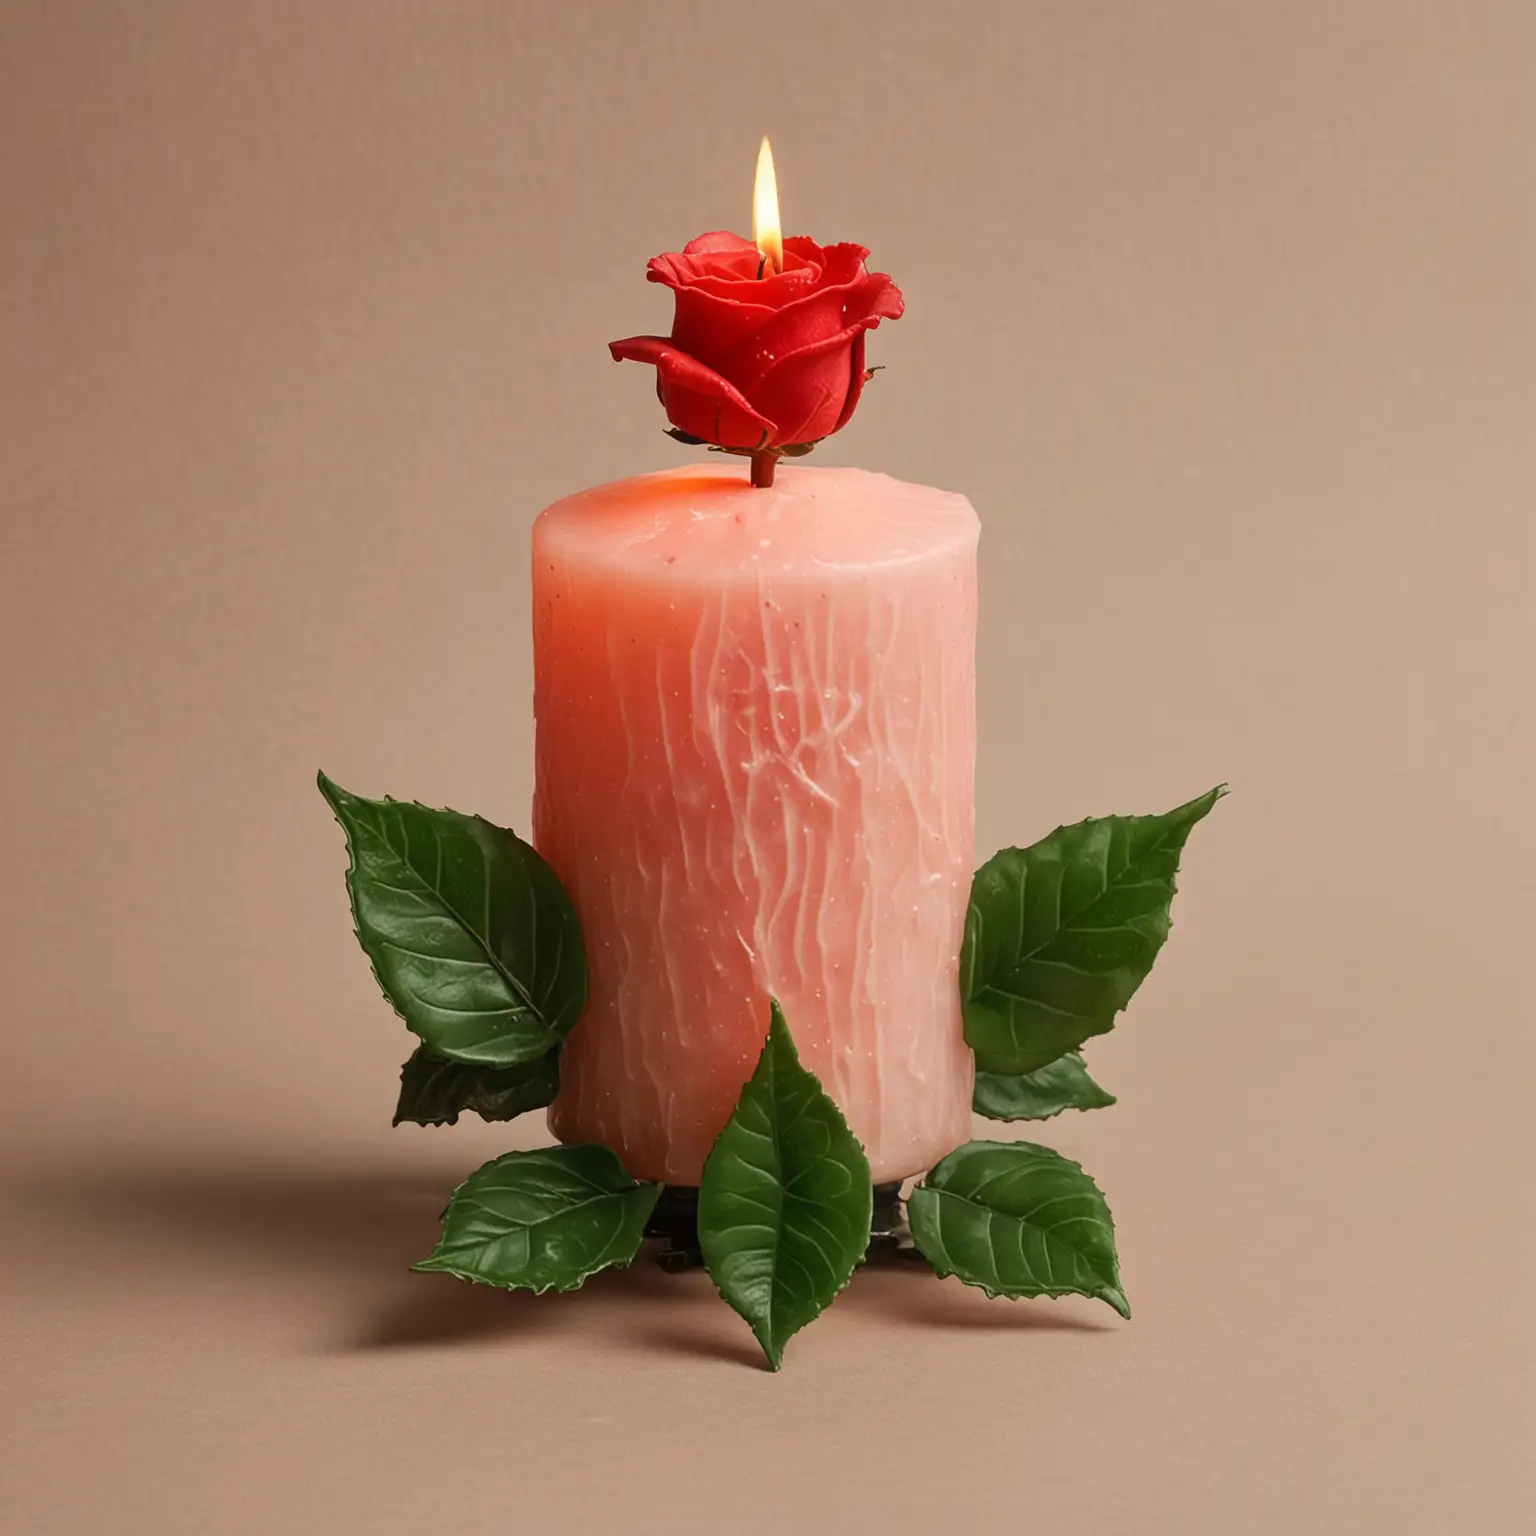  candle, red rose flower shape, green leaves